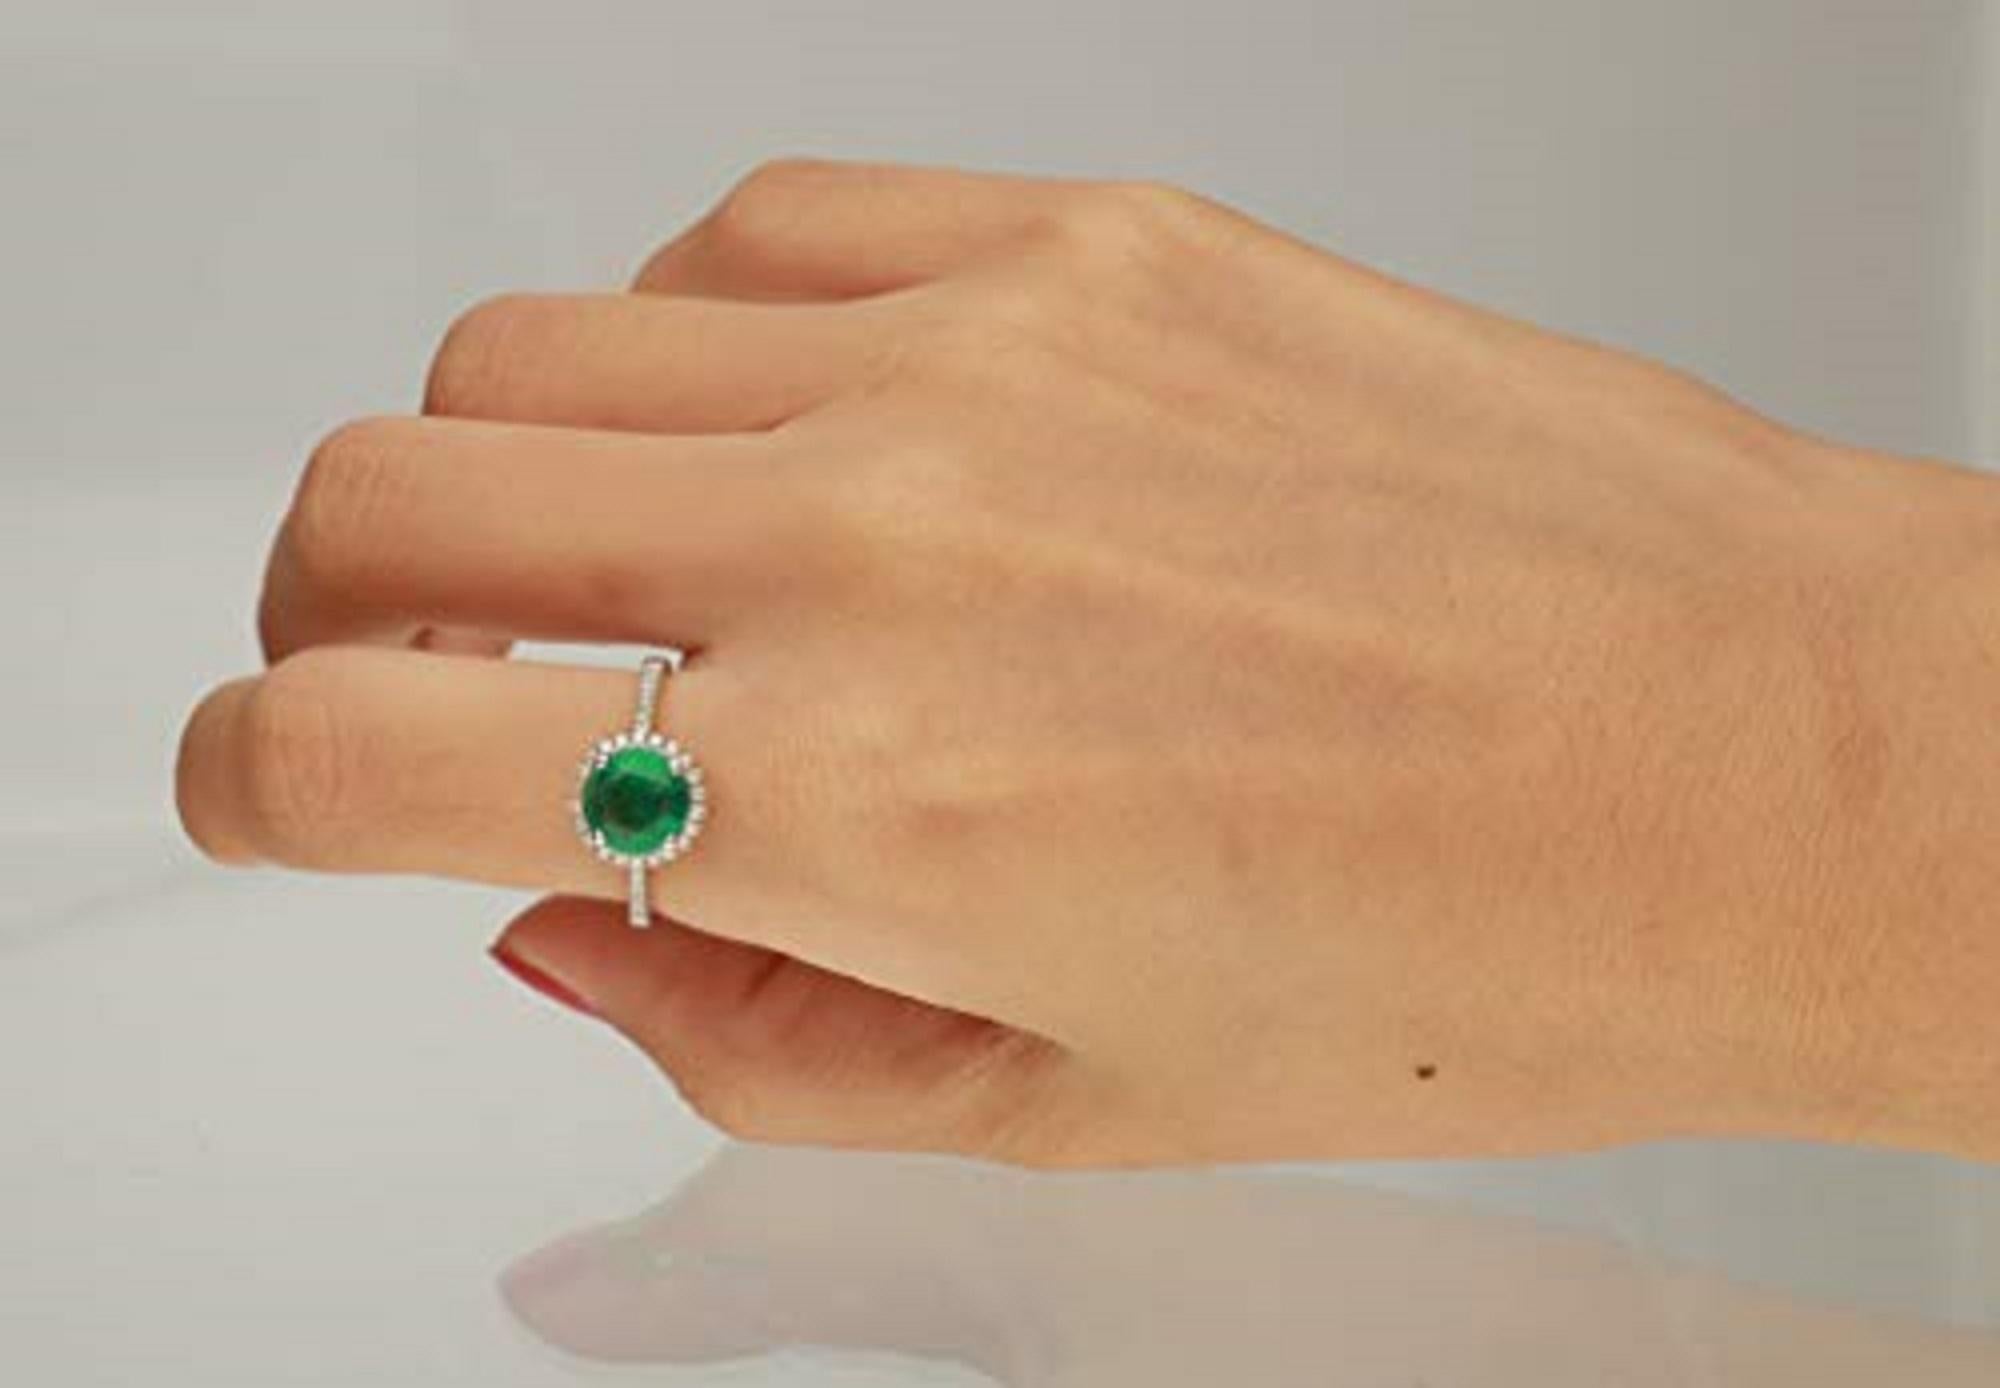 Stunning, timeless and classy eternity Unique Ring. Decorate yourself in luxury with this Gin & Grace Ring. The 18k White Gold jewelry boasts Round-Cut Prong Setting Natural Emerald (1 pcs) 1.57 Carat, along with Natural Round cut white Diamond (36